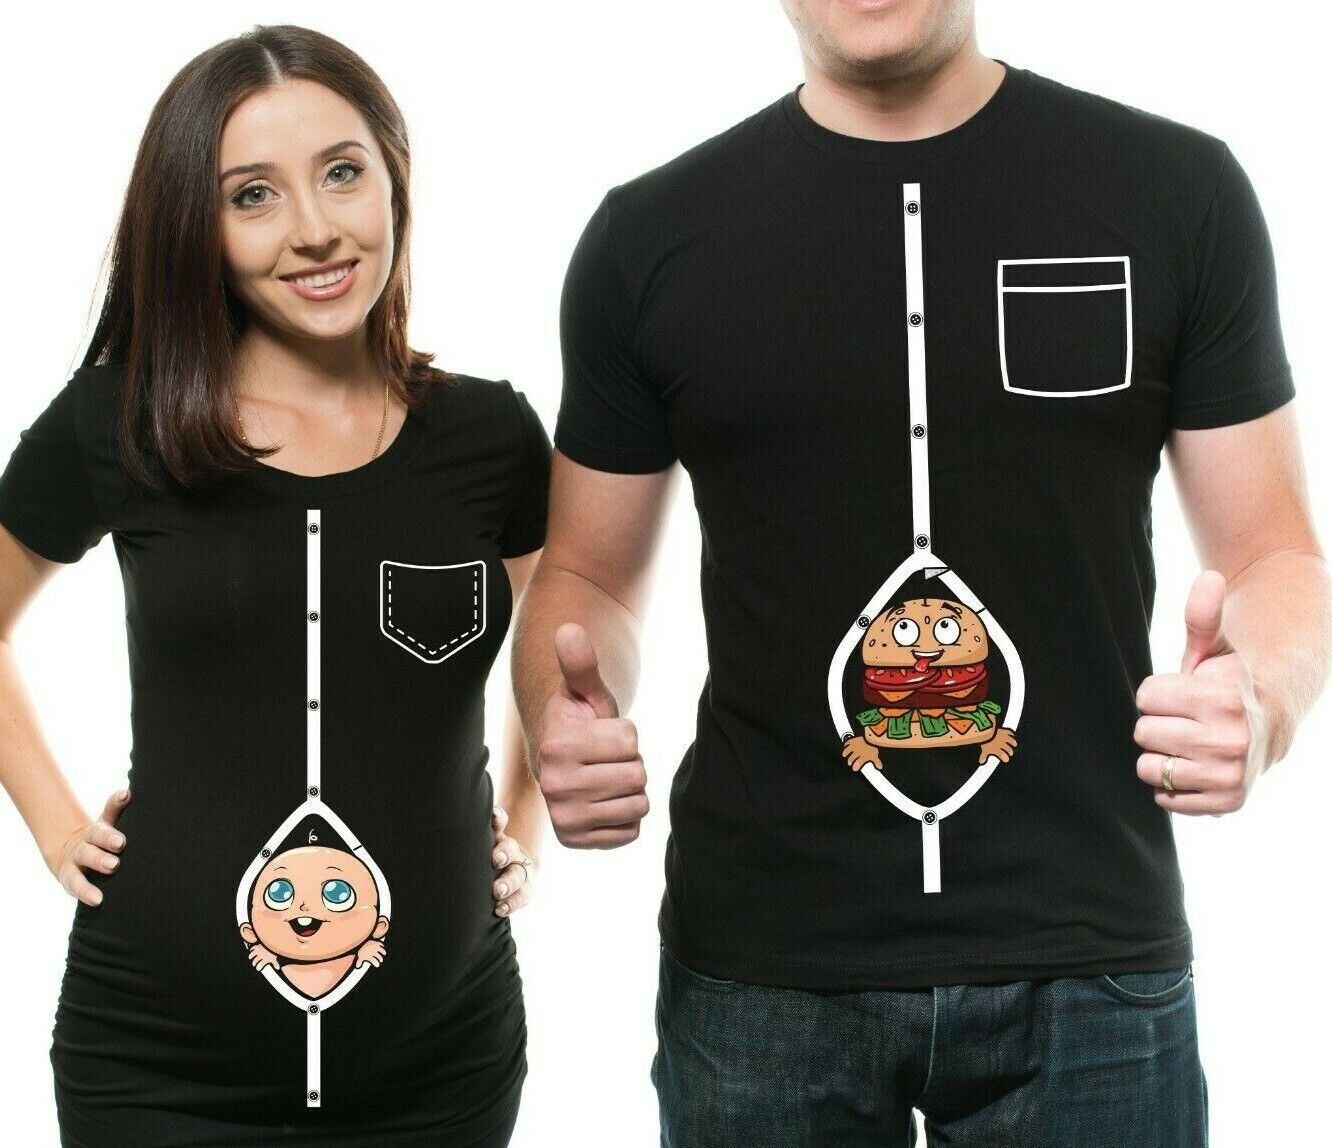 Pregnancy Funny Couple T-shirts Pregnancy Announcement Funny Maternity  T-shirts | eBay